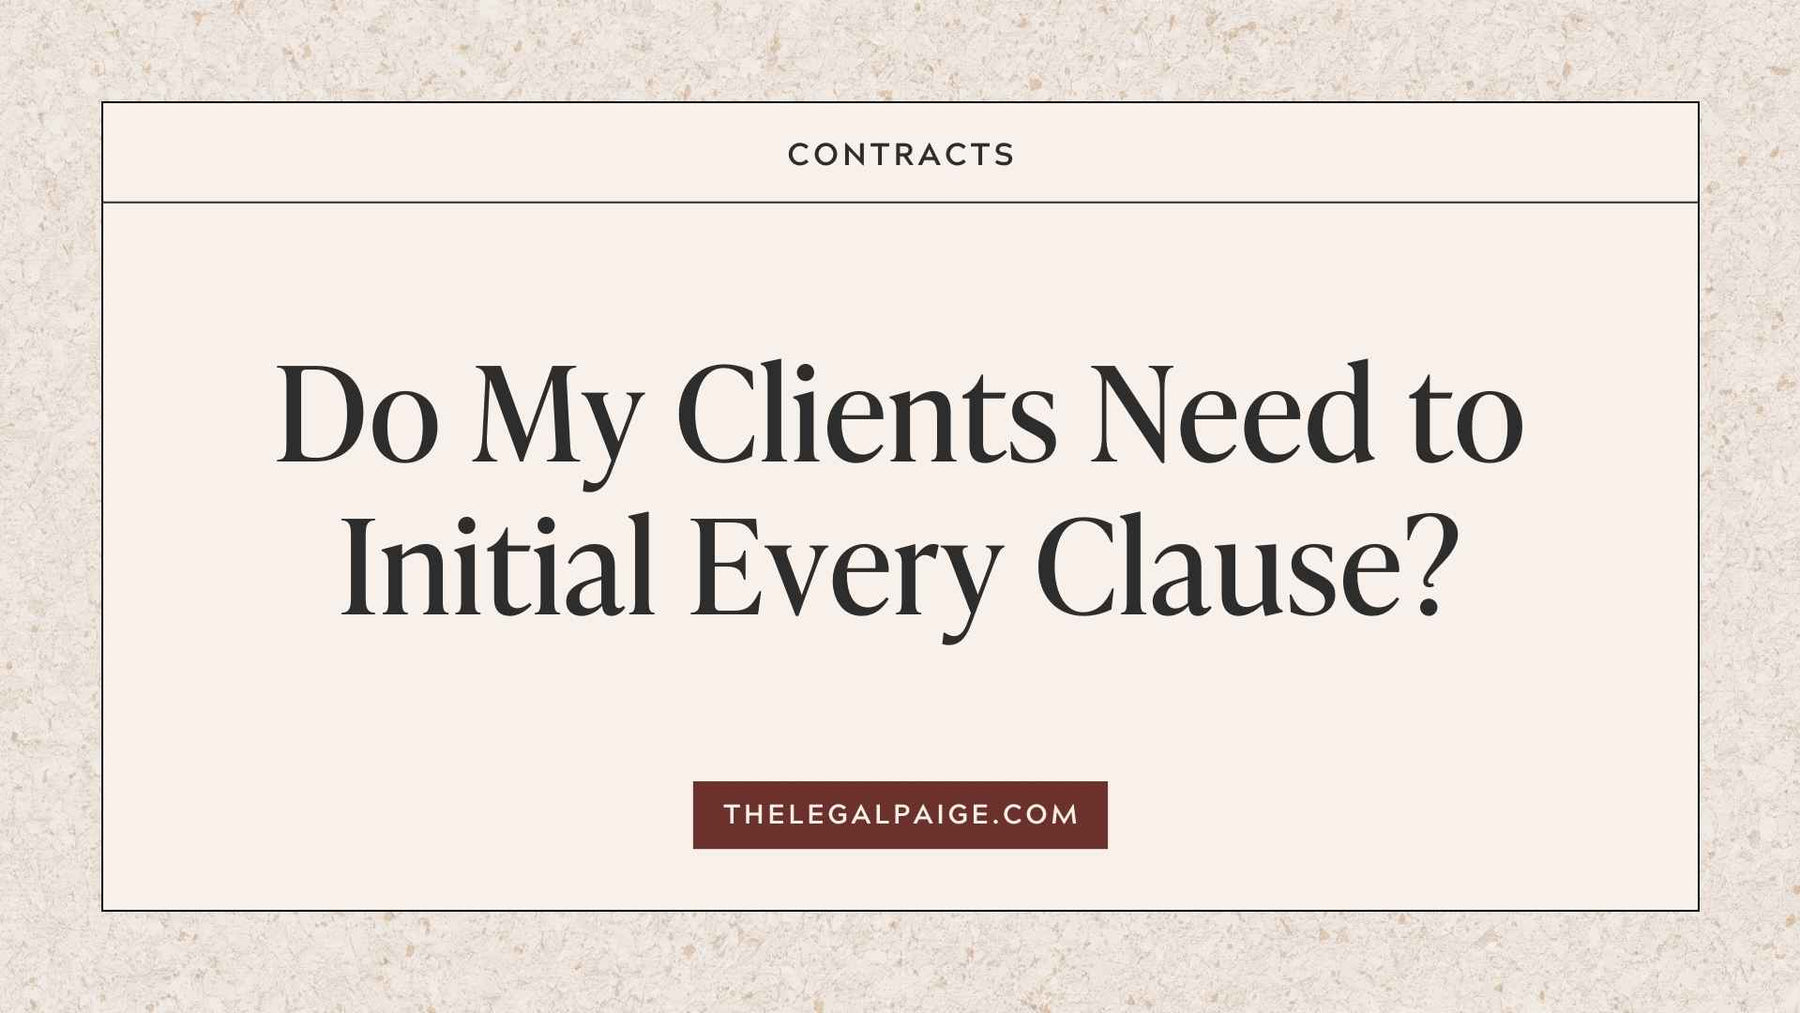 The Legal Paige Blog - Do my clients need to initial every clause?